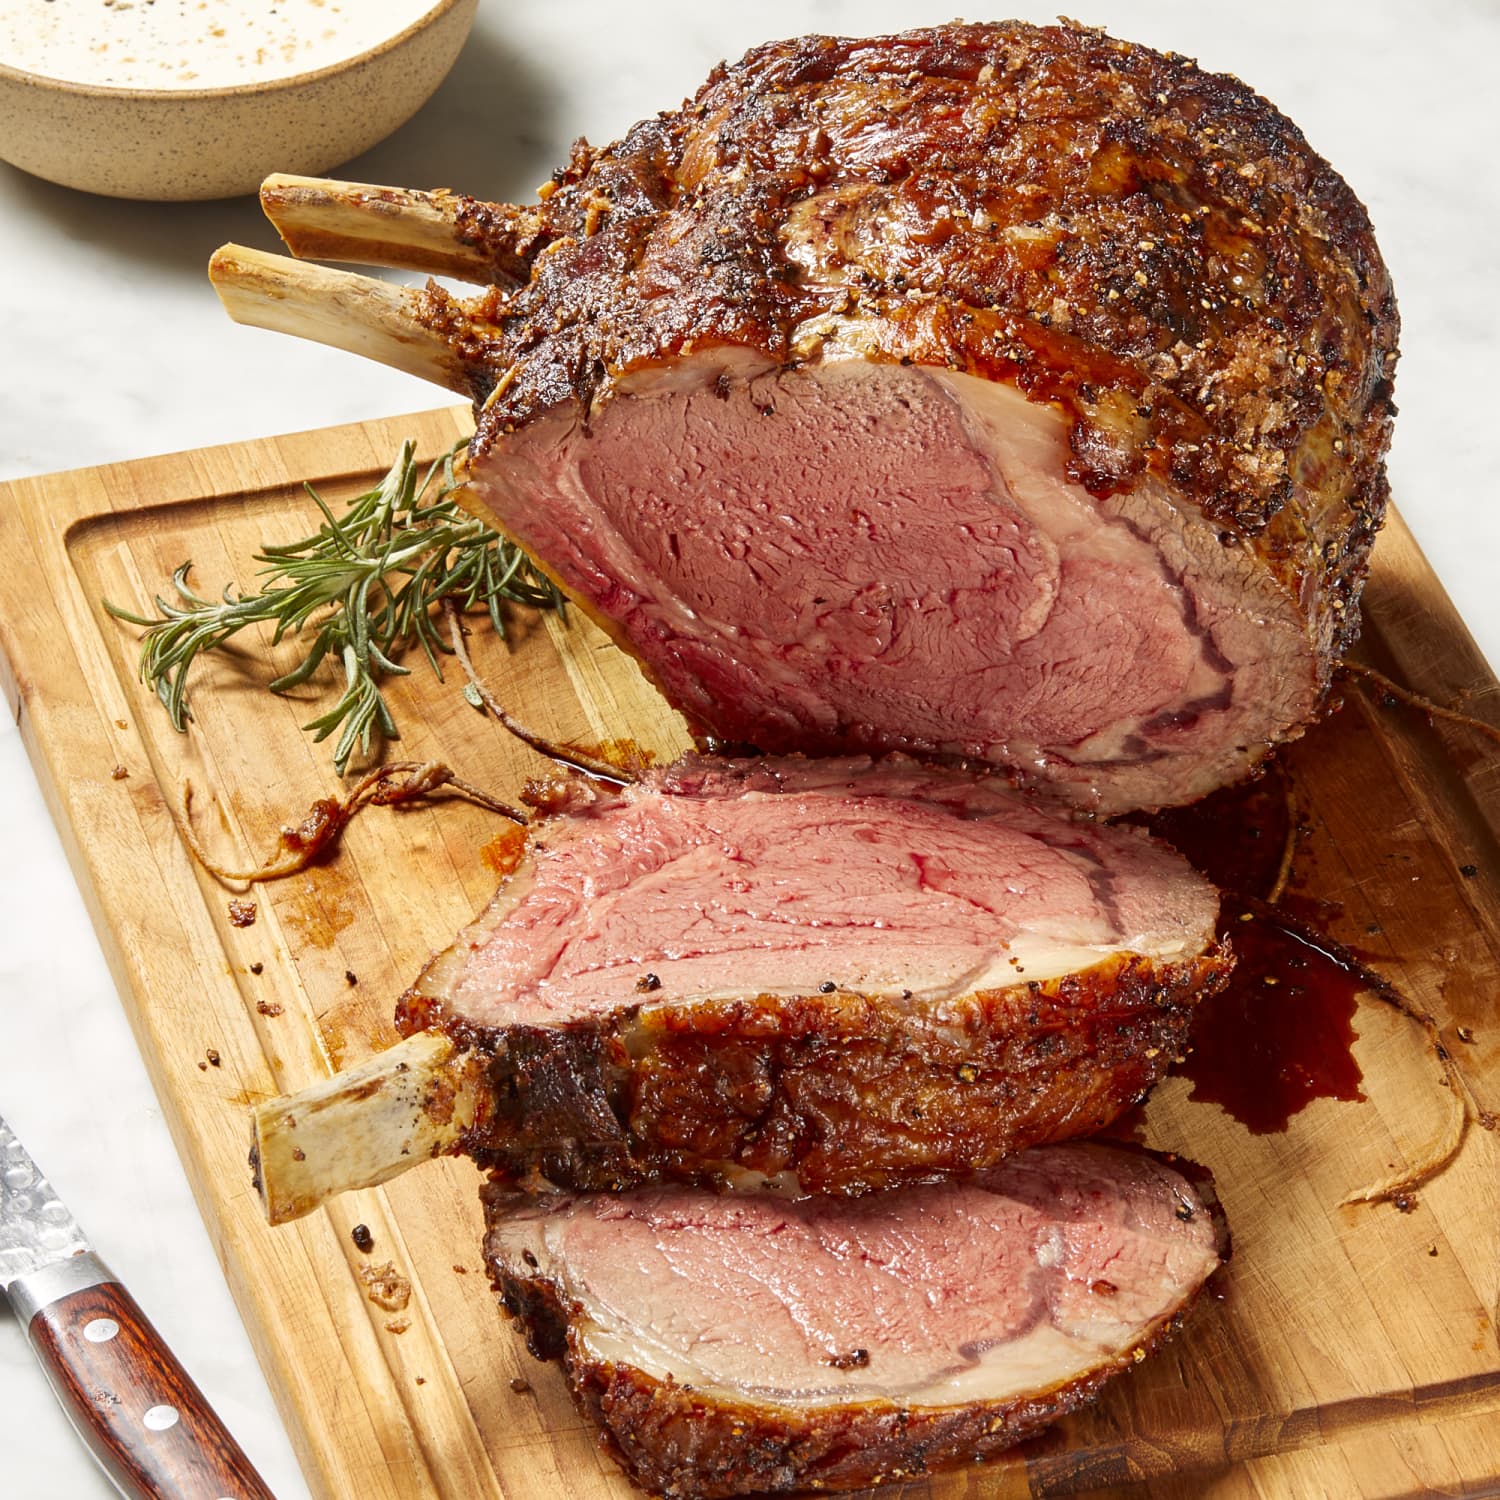 Perfect Prime Rib Roast Recipe and Cooking Instructions